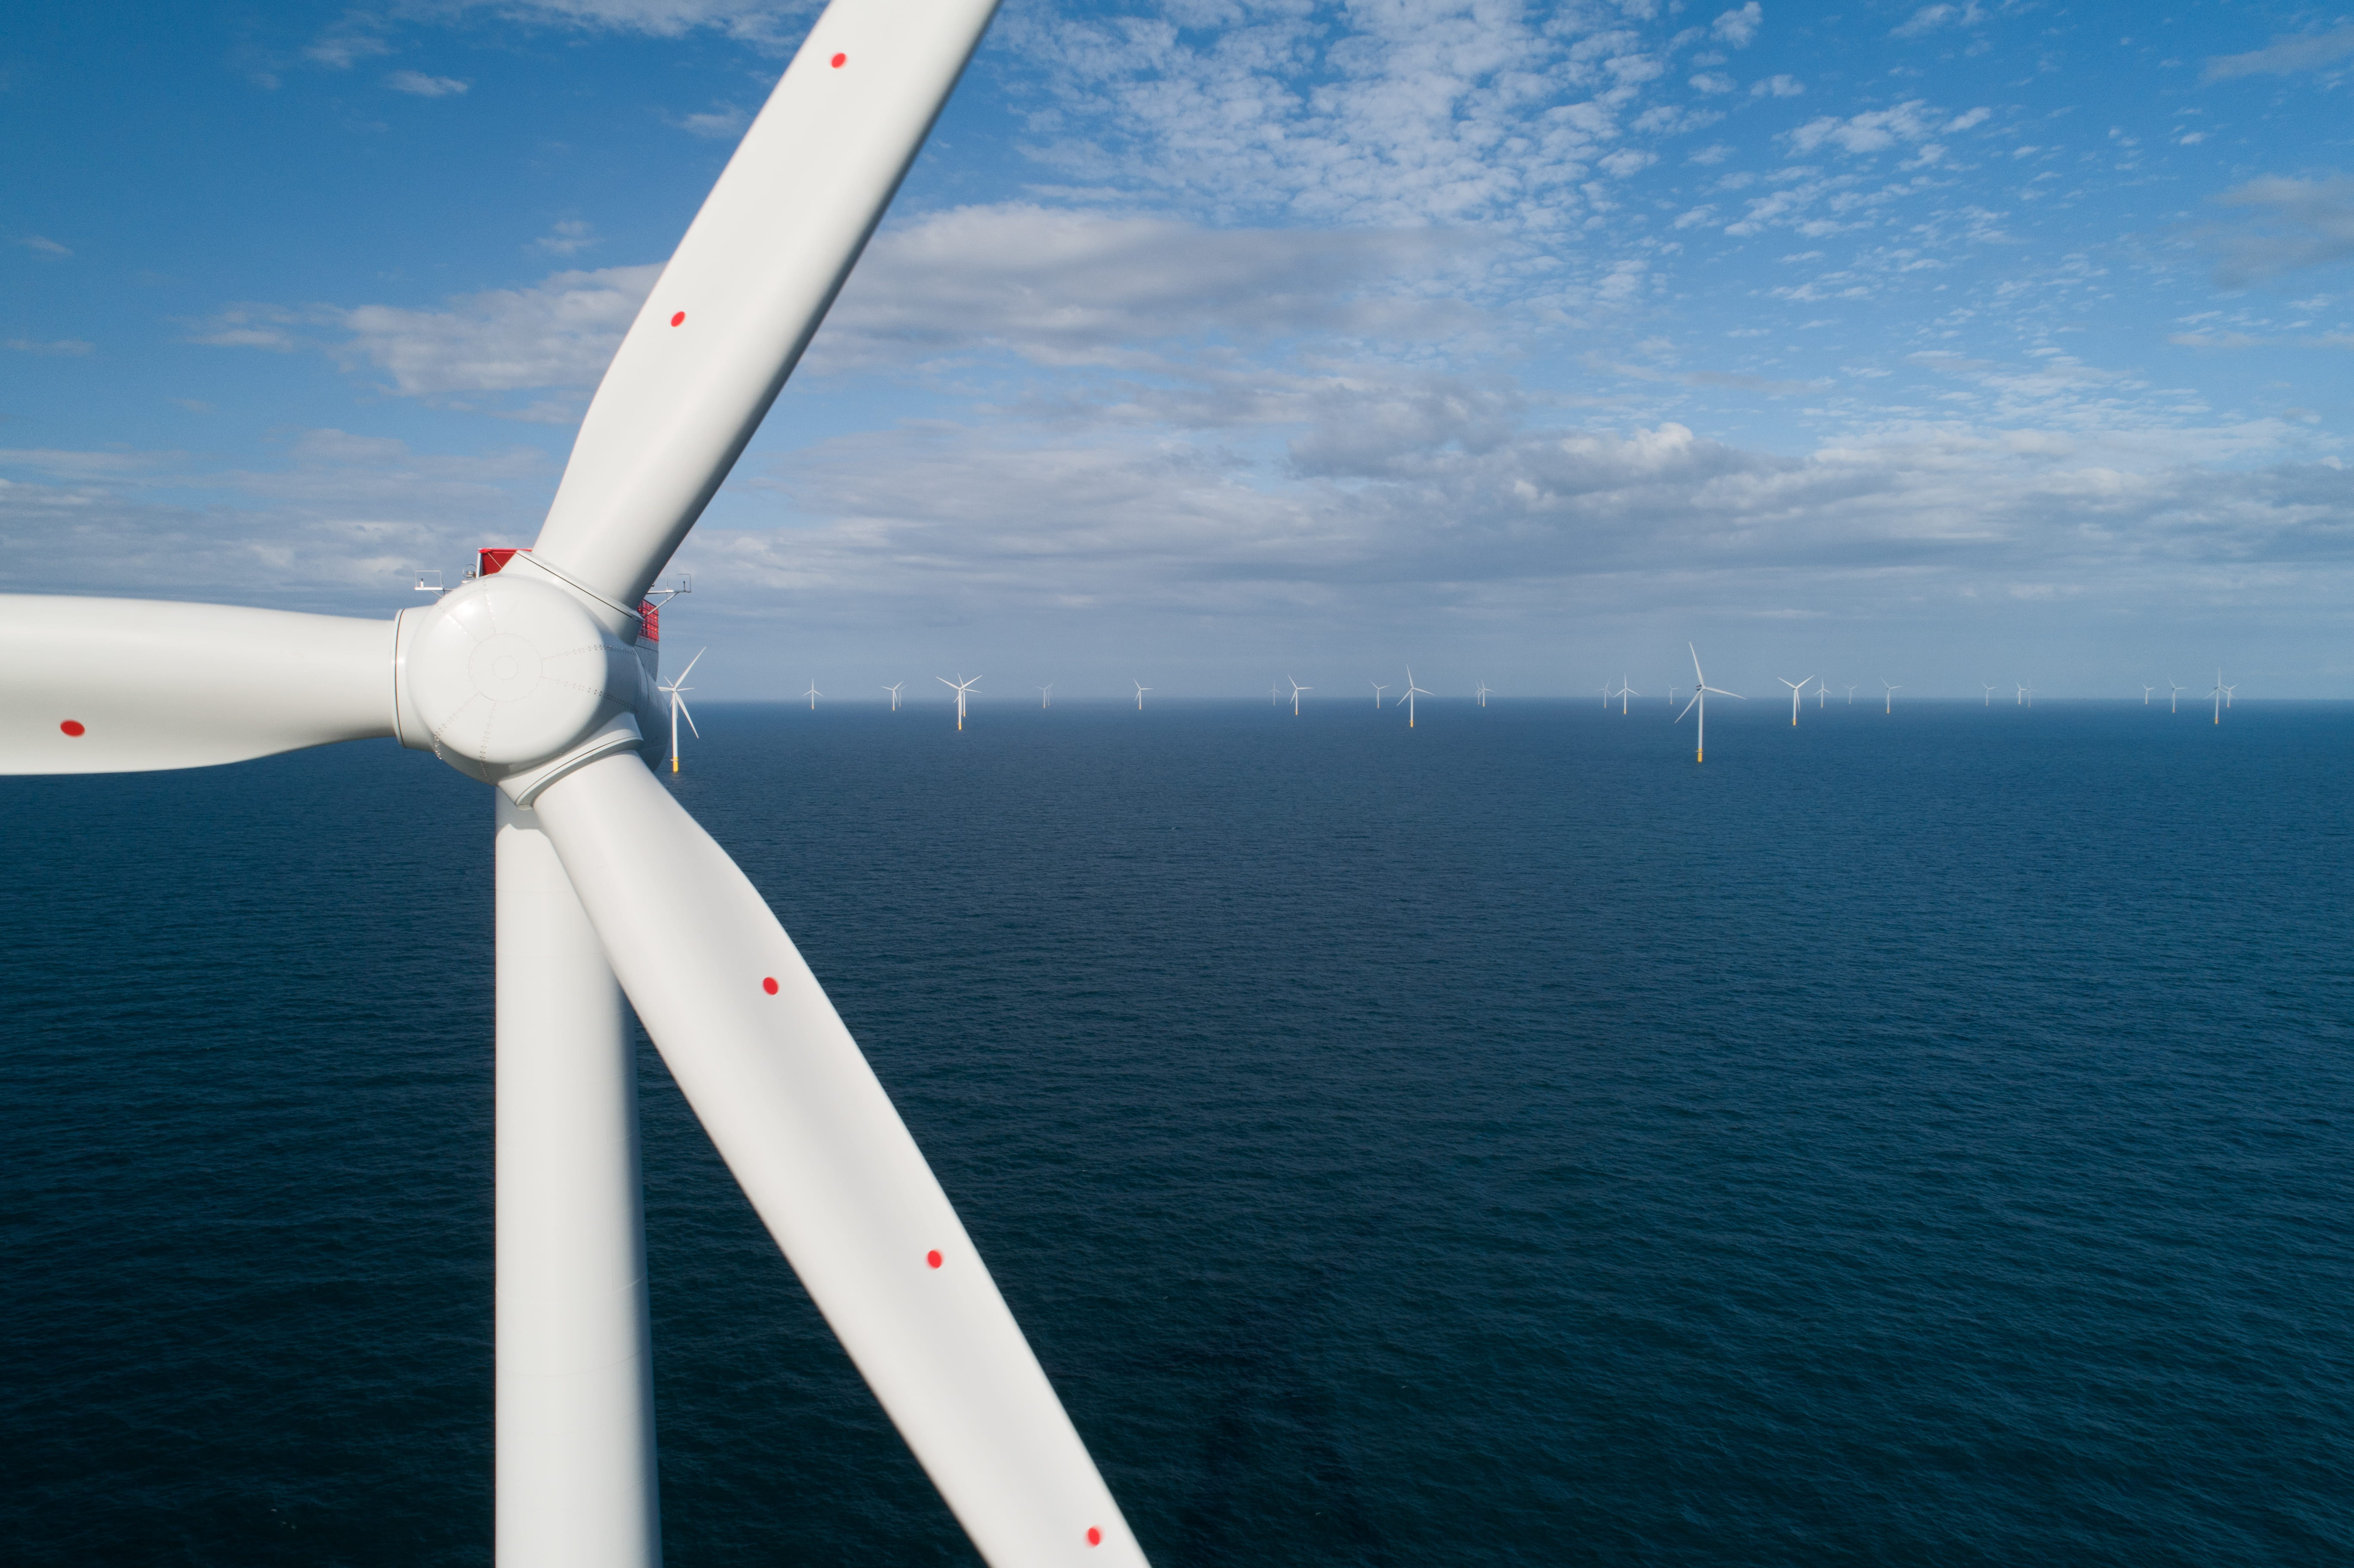 inal turbine installed as world’s largest offshore wind farm nears completion